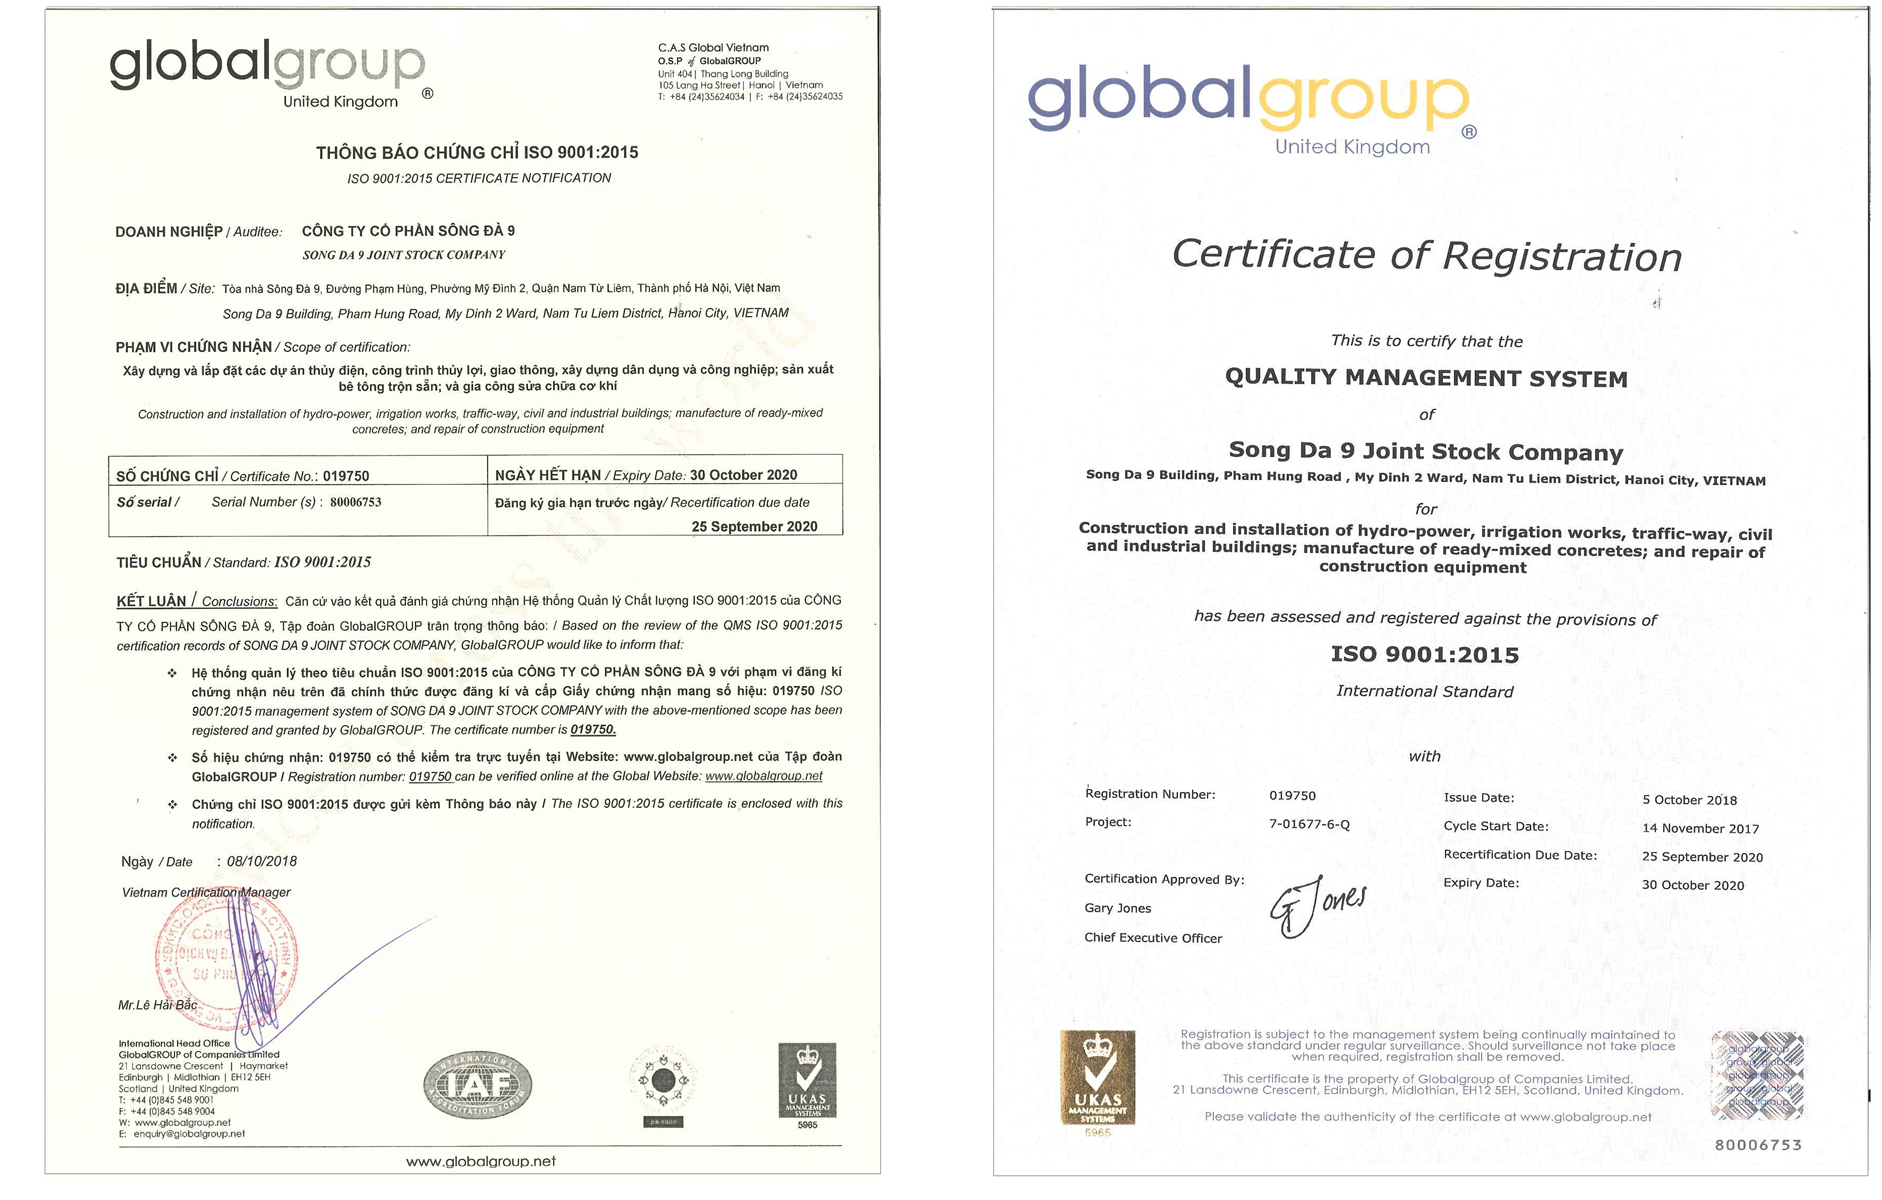 Song Da 9 upgraded its quality management system to ISO 9001:2015